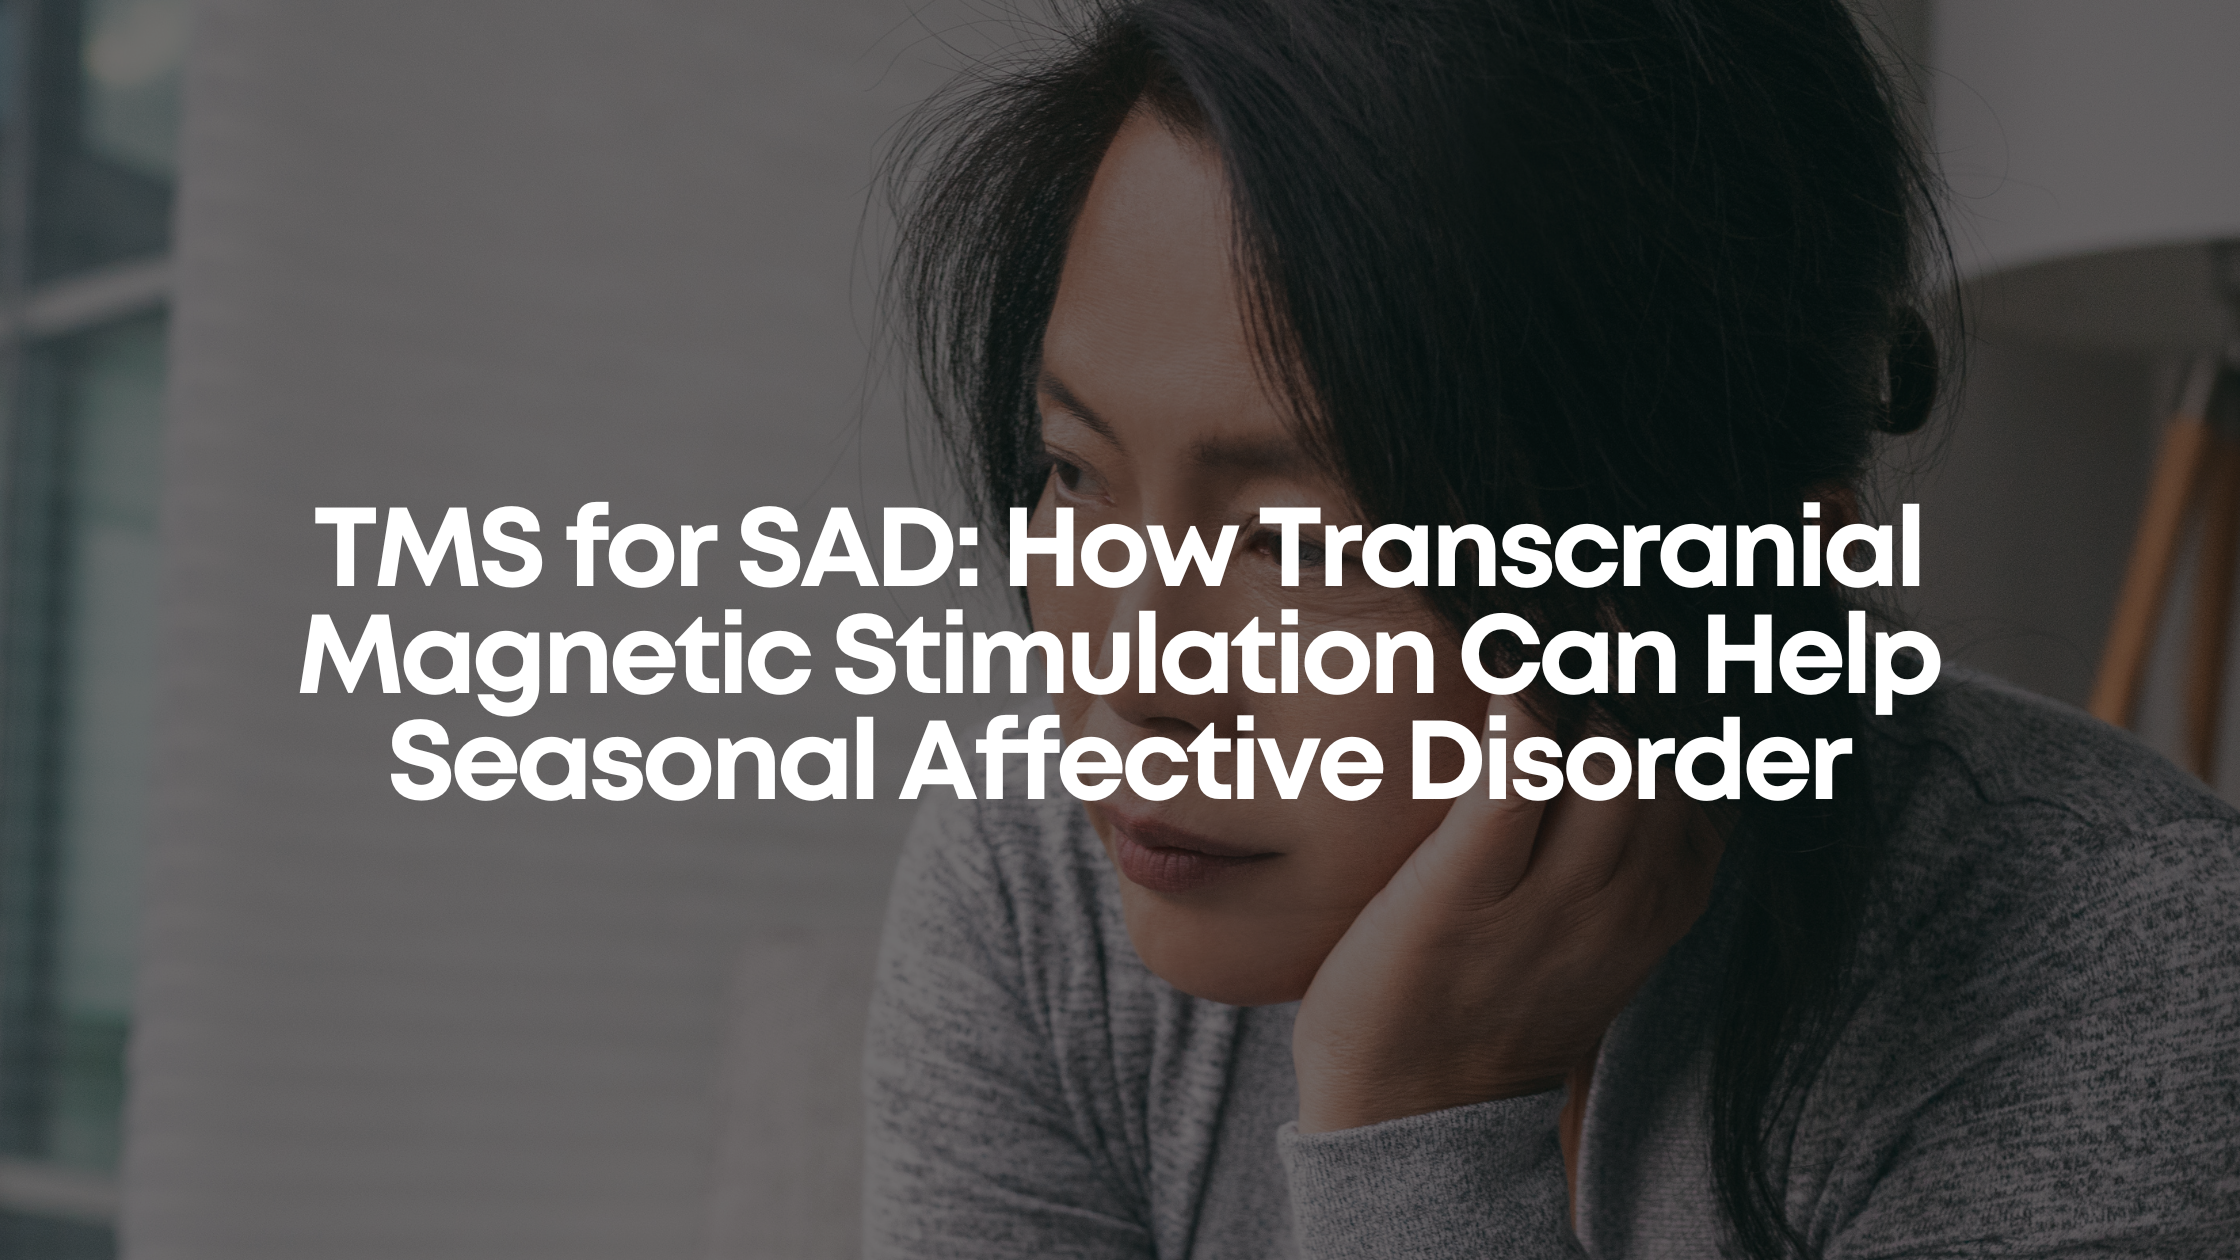 You are currently viewing TMS for SAD: How Transcranial Magnetic Stimulation Can Help Seasonal Affective Disorder